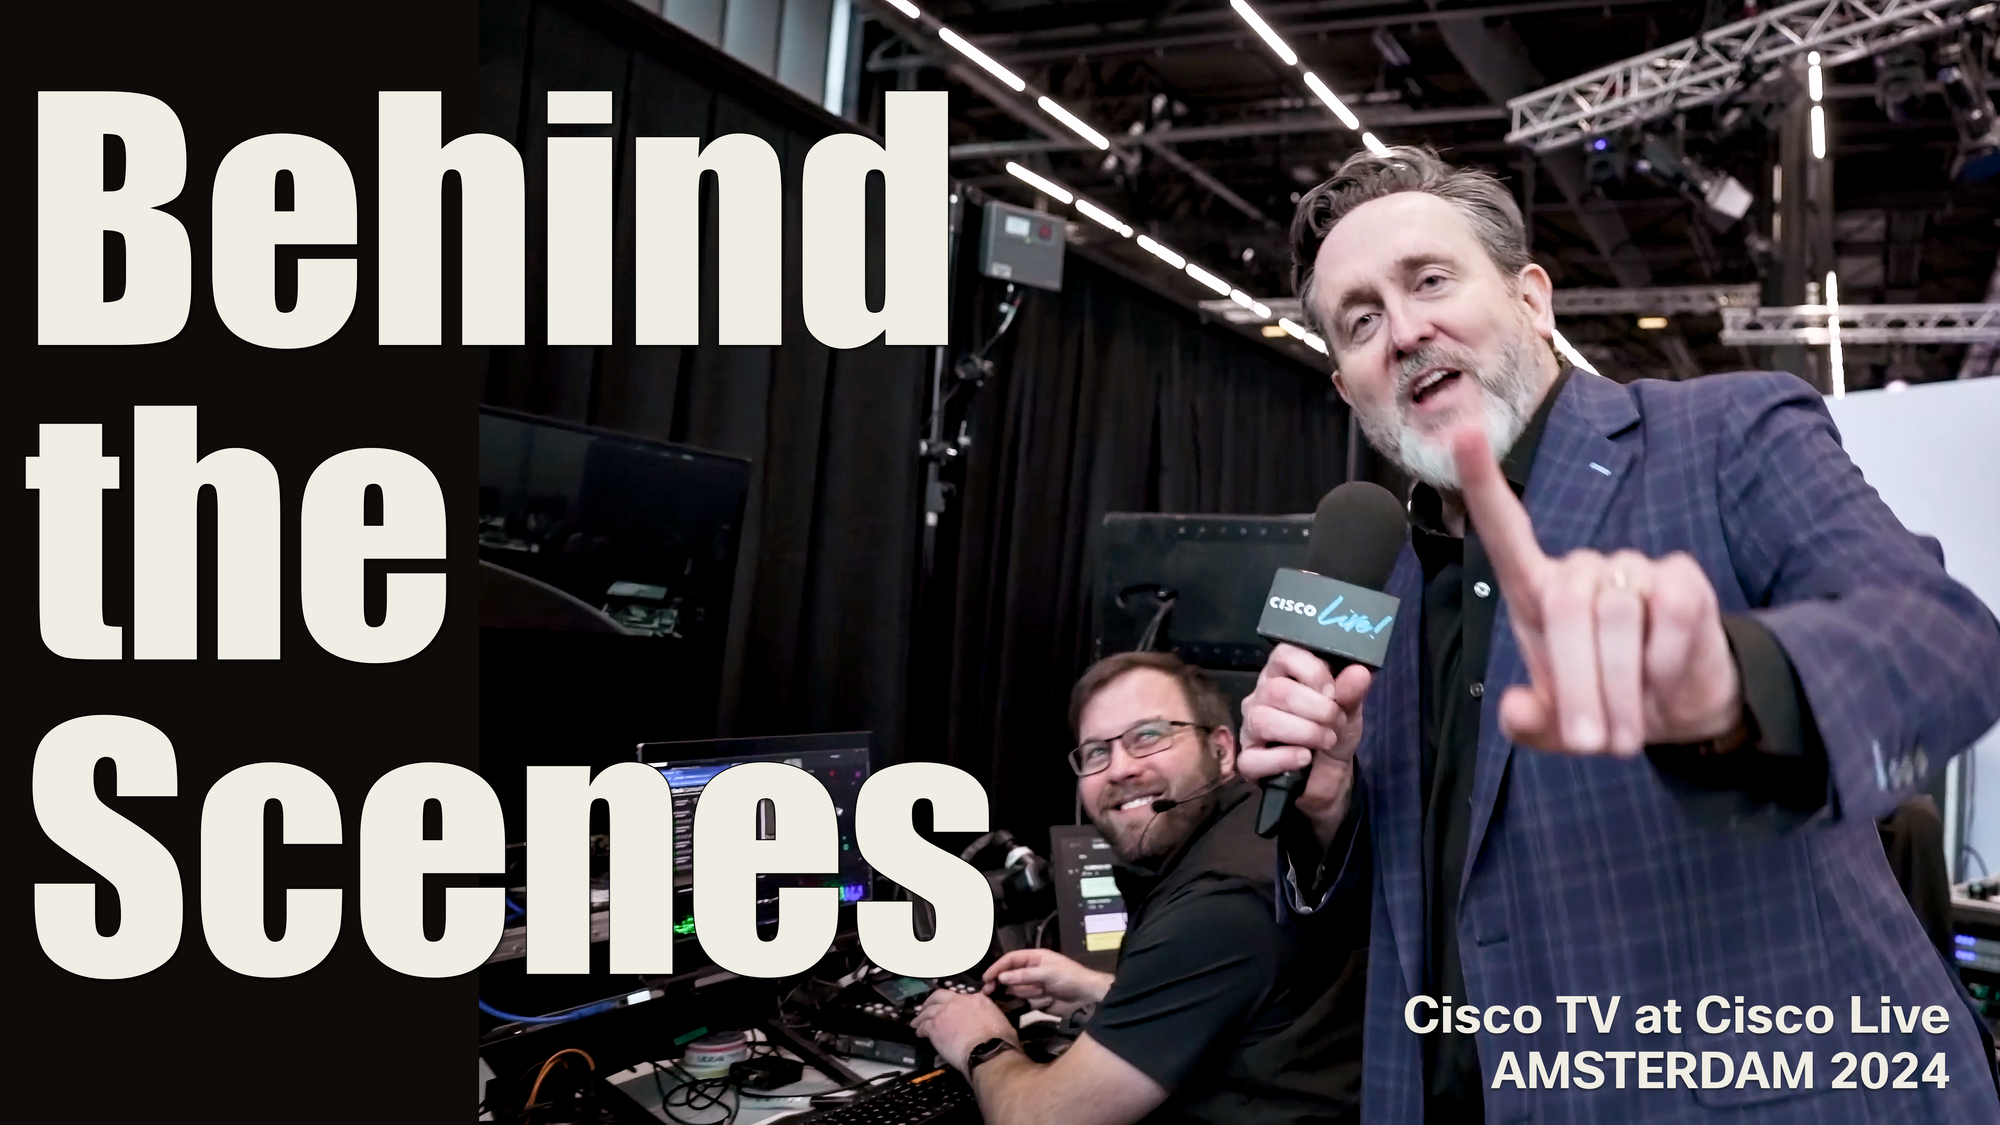 Behind the Scenes at Cisco Live with Cisco TV